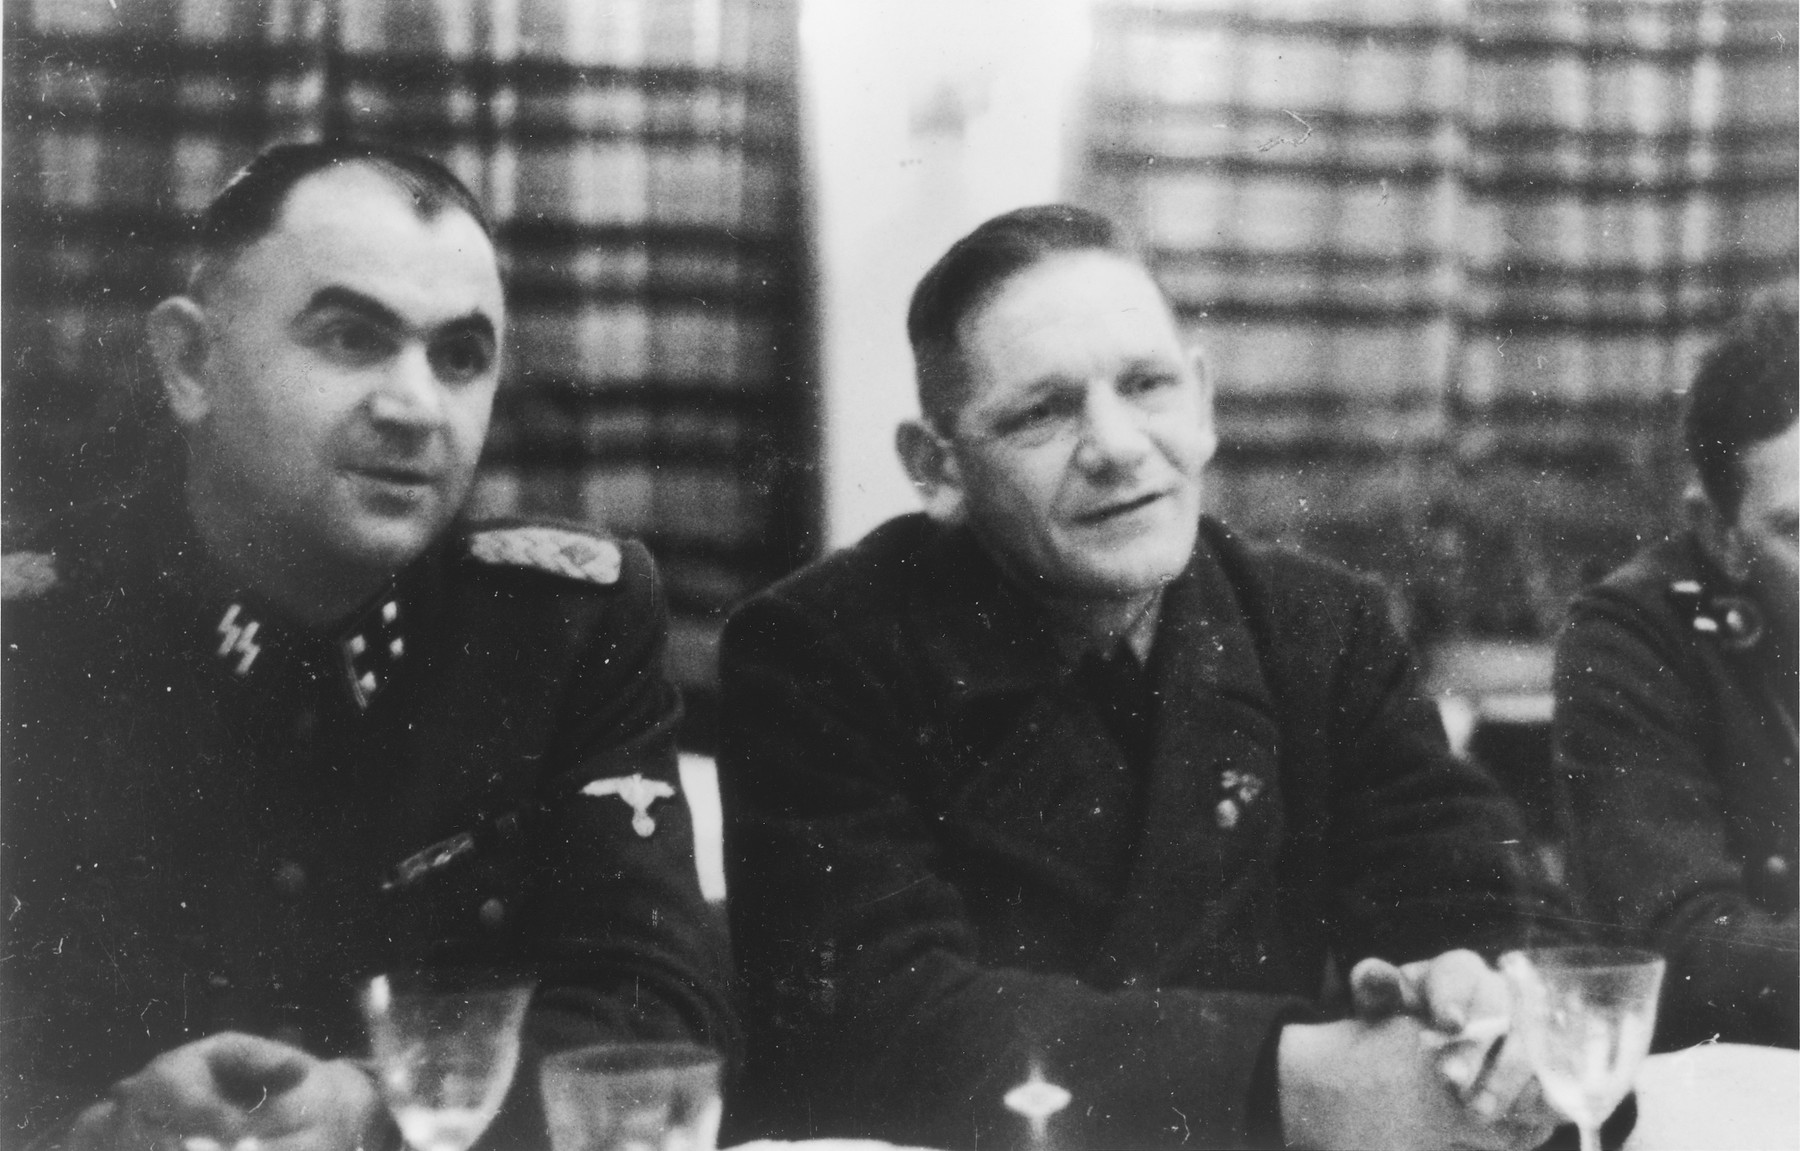 Two SS officers gather for drinks in a hunting lodge.

Pictured on the lett is Karl Moeckel.